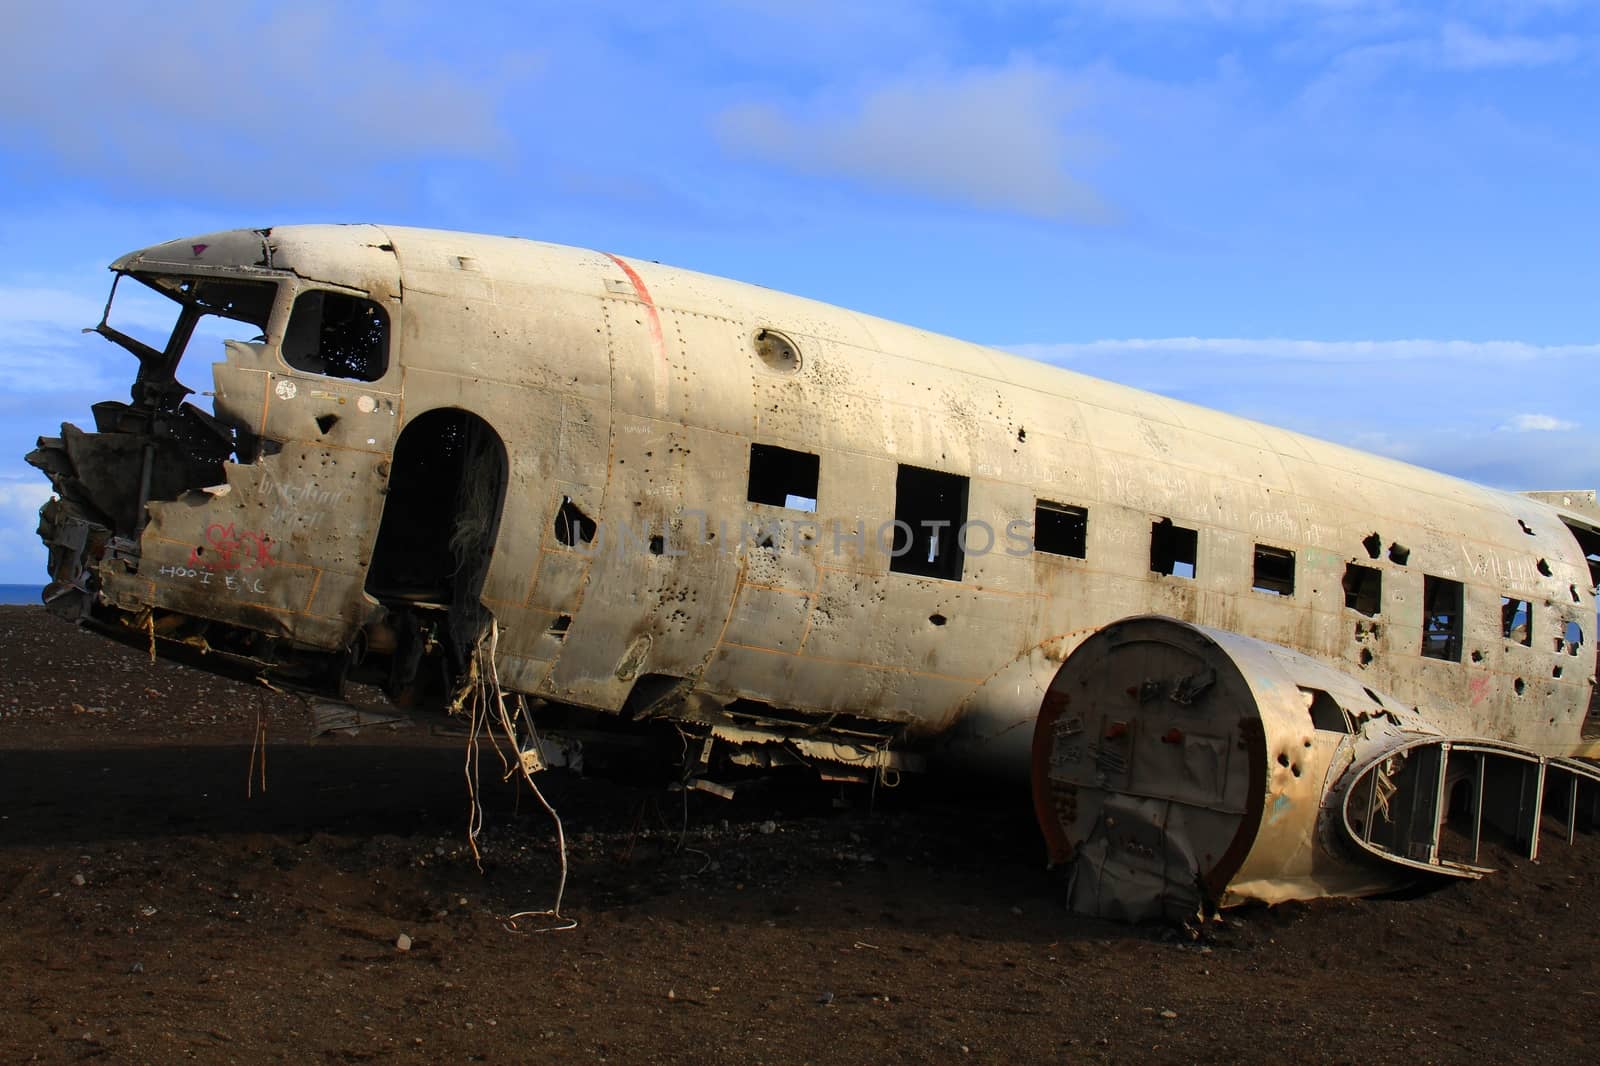 Airplane wrack, Iceland by Jindrich_Blecha